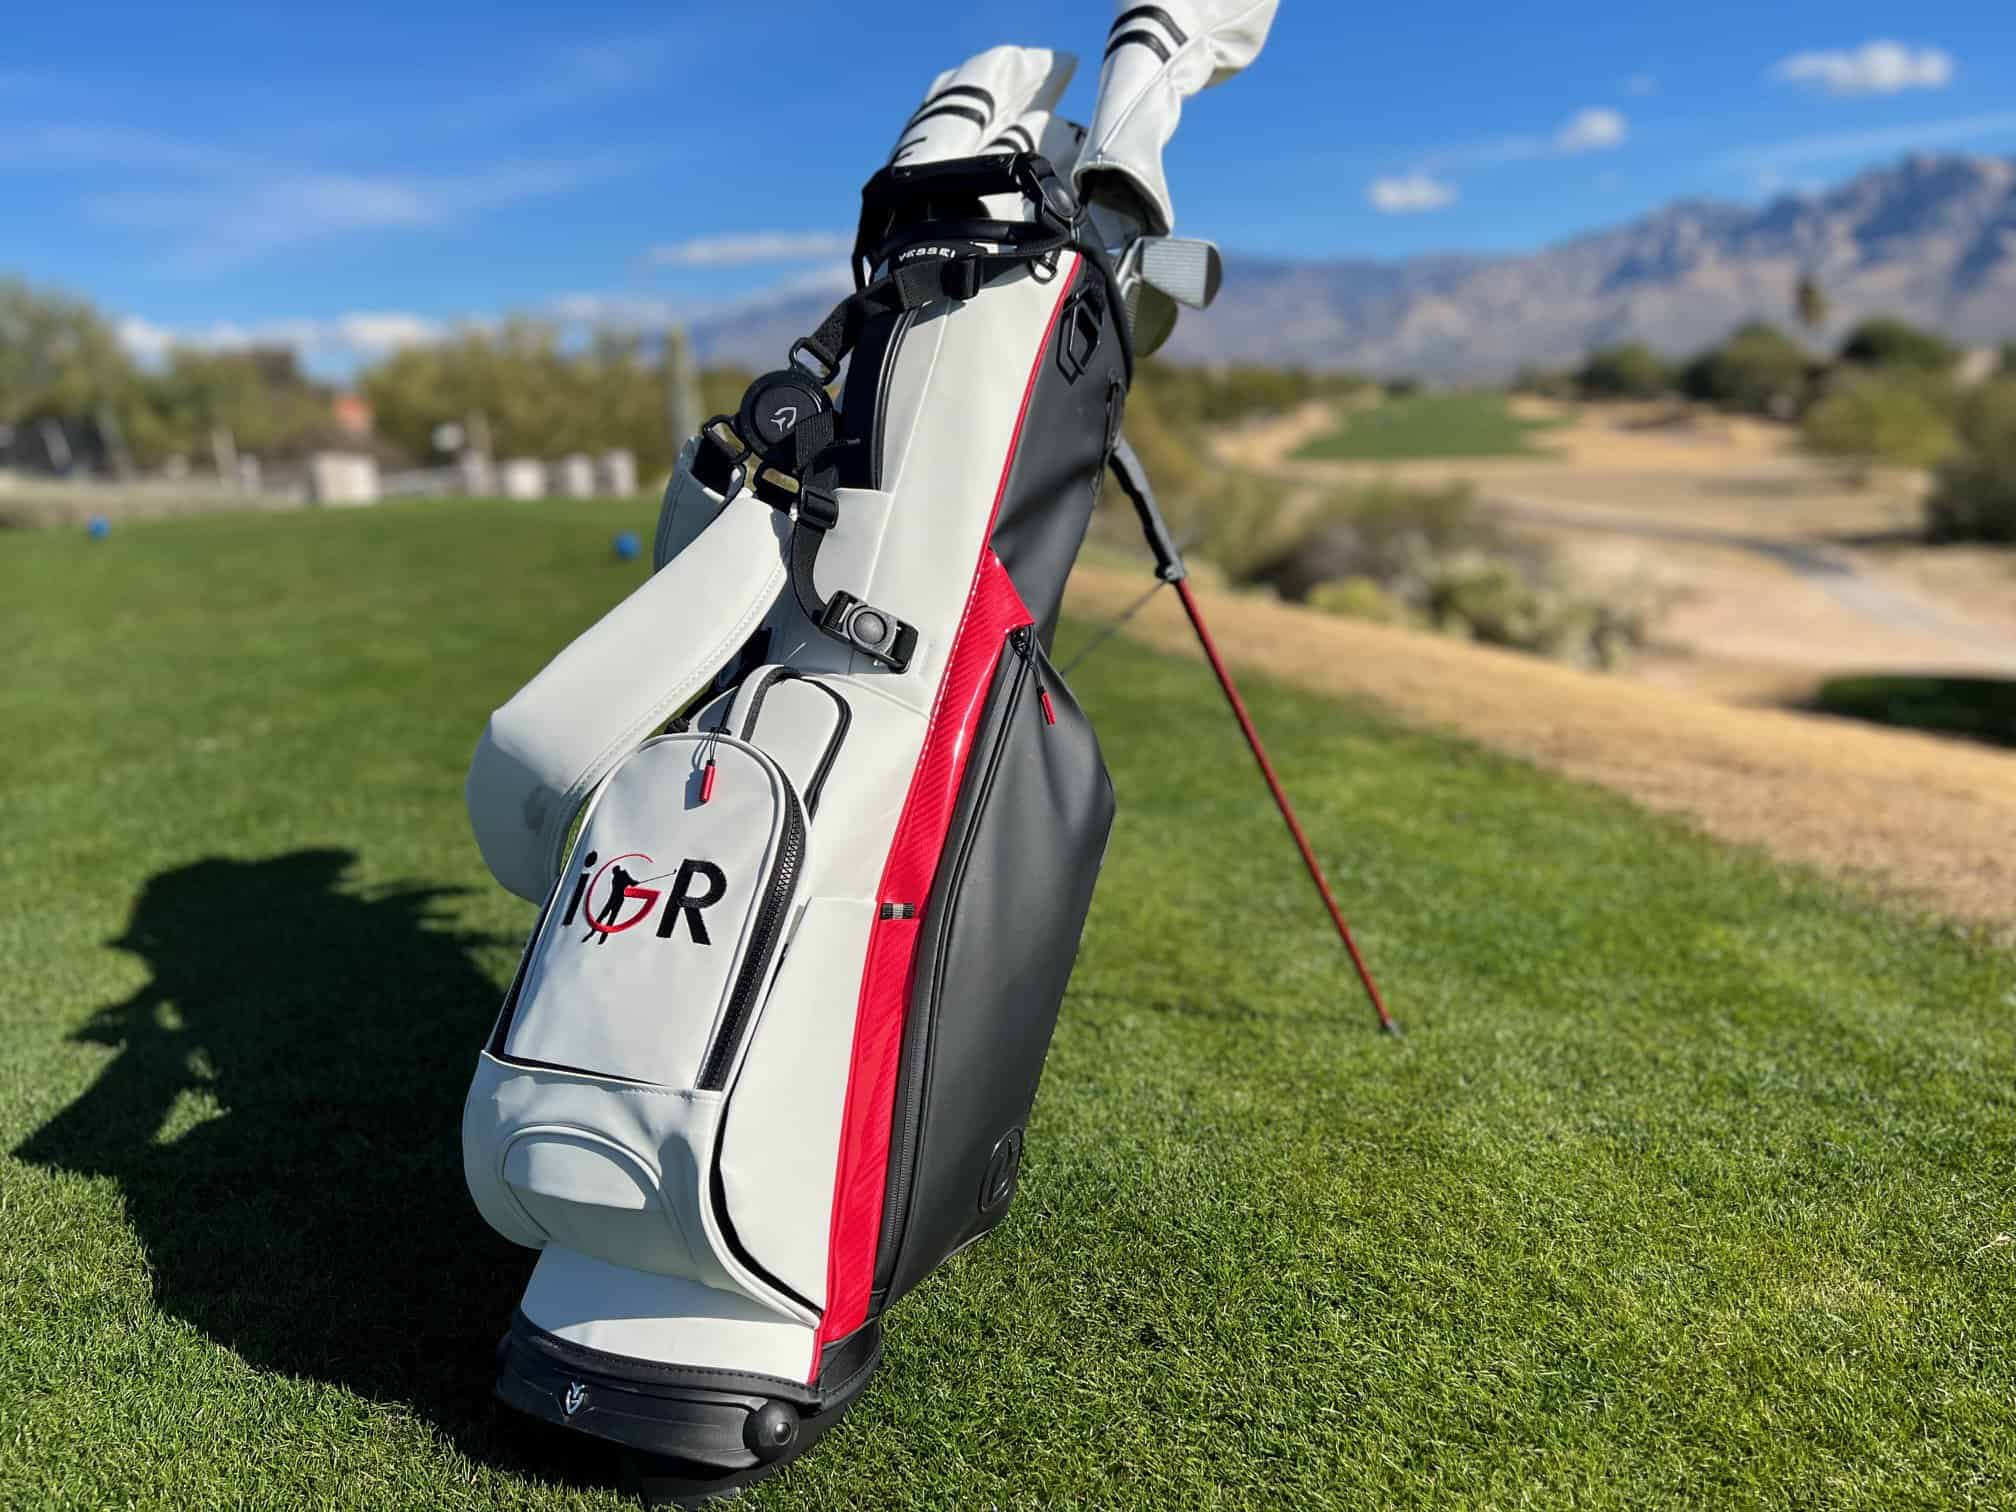 Vessel Player 4 bag review - Golf Bags/Carts/Headcovers - GolfWRX